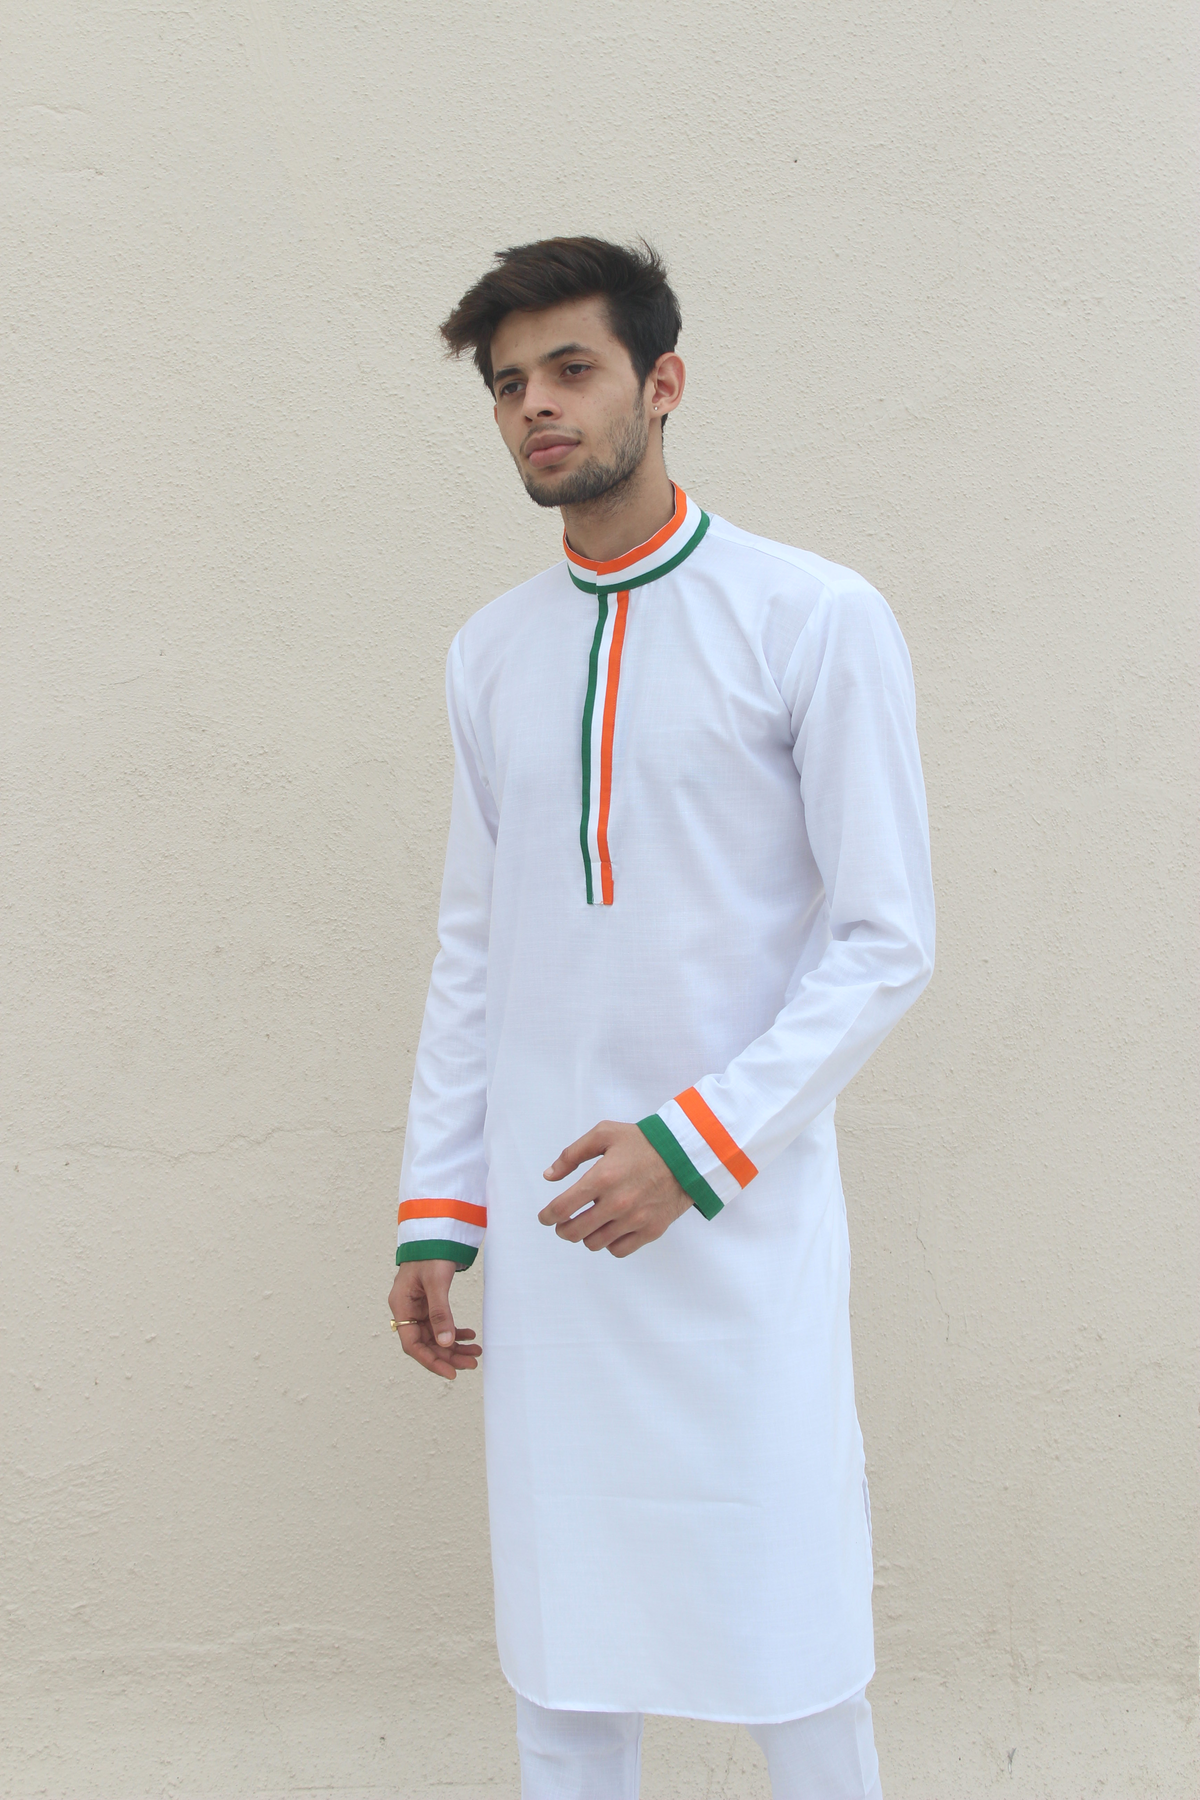 Buy Now Tricolor Suit Online @ Best Price | ItsMyCostume